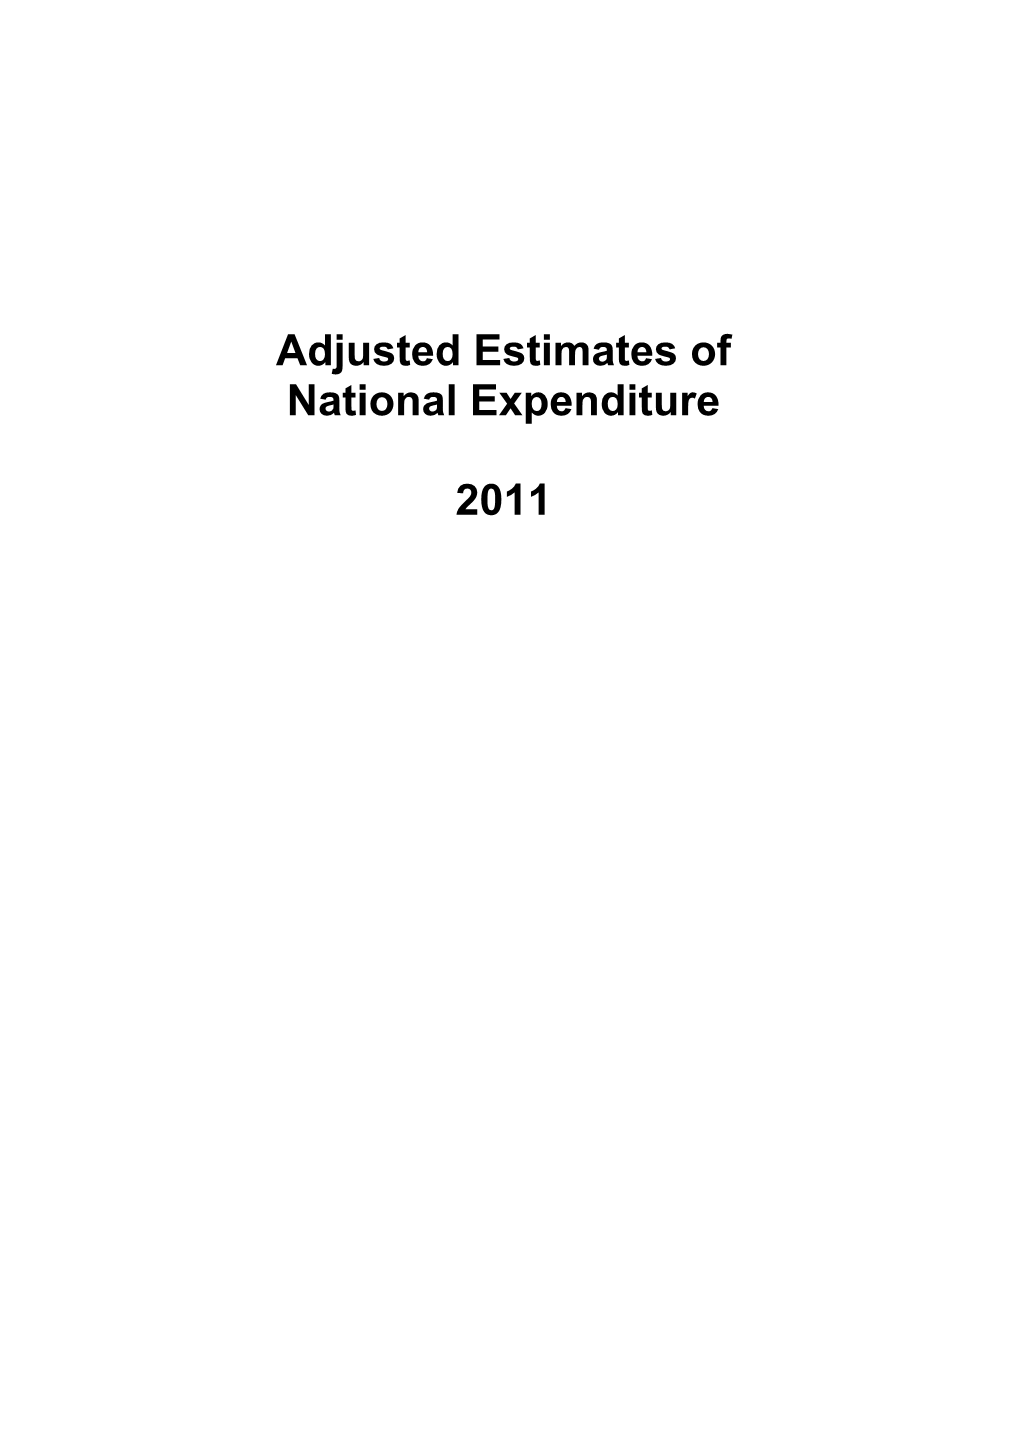 Adjusted Estimates of National Expenditure 2011 Is Compiled with the Latest Available Information from Departmental and Other Sources